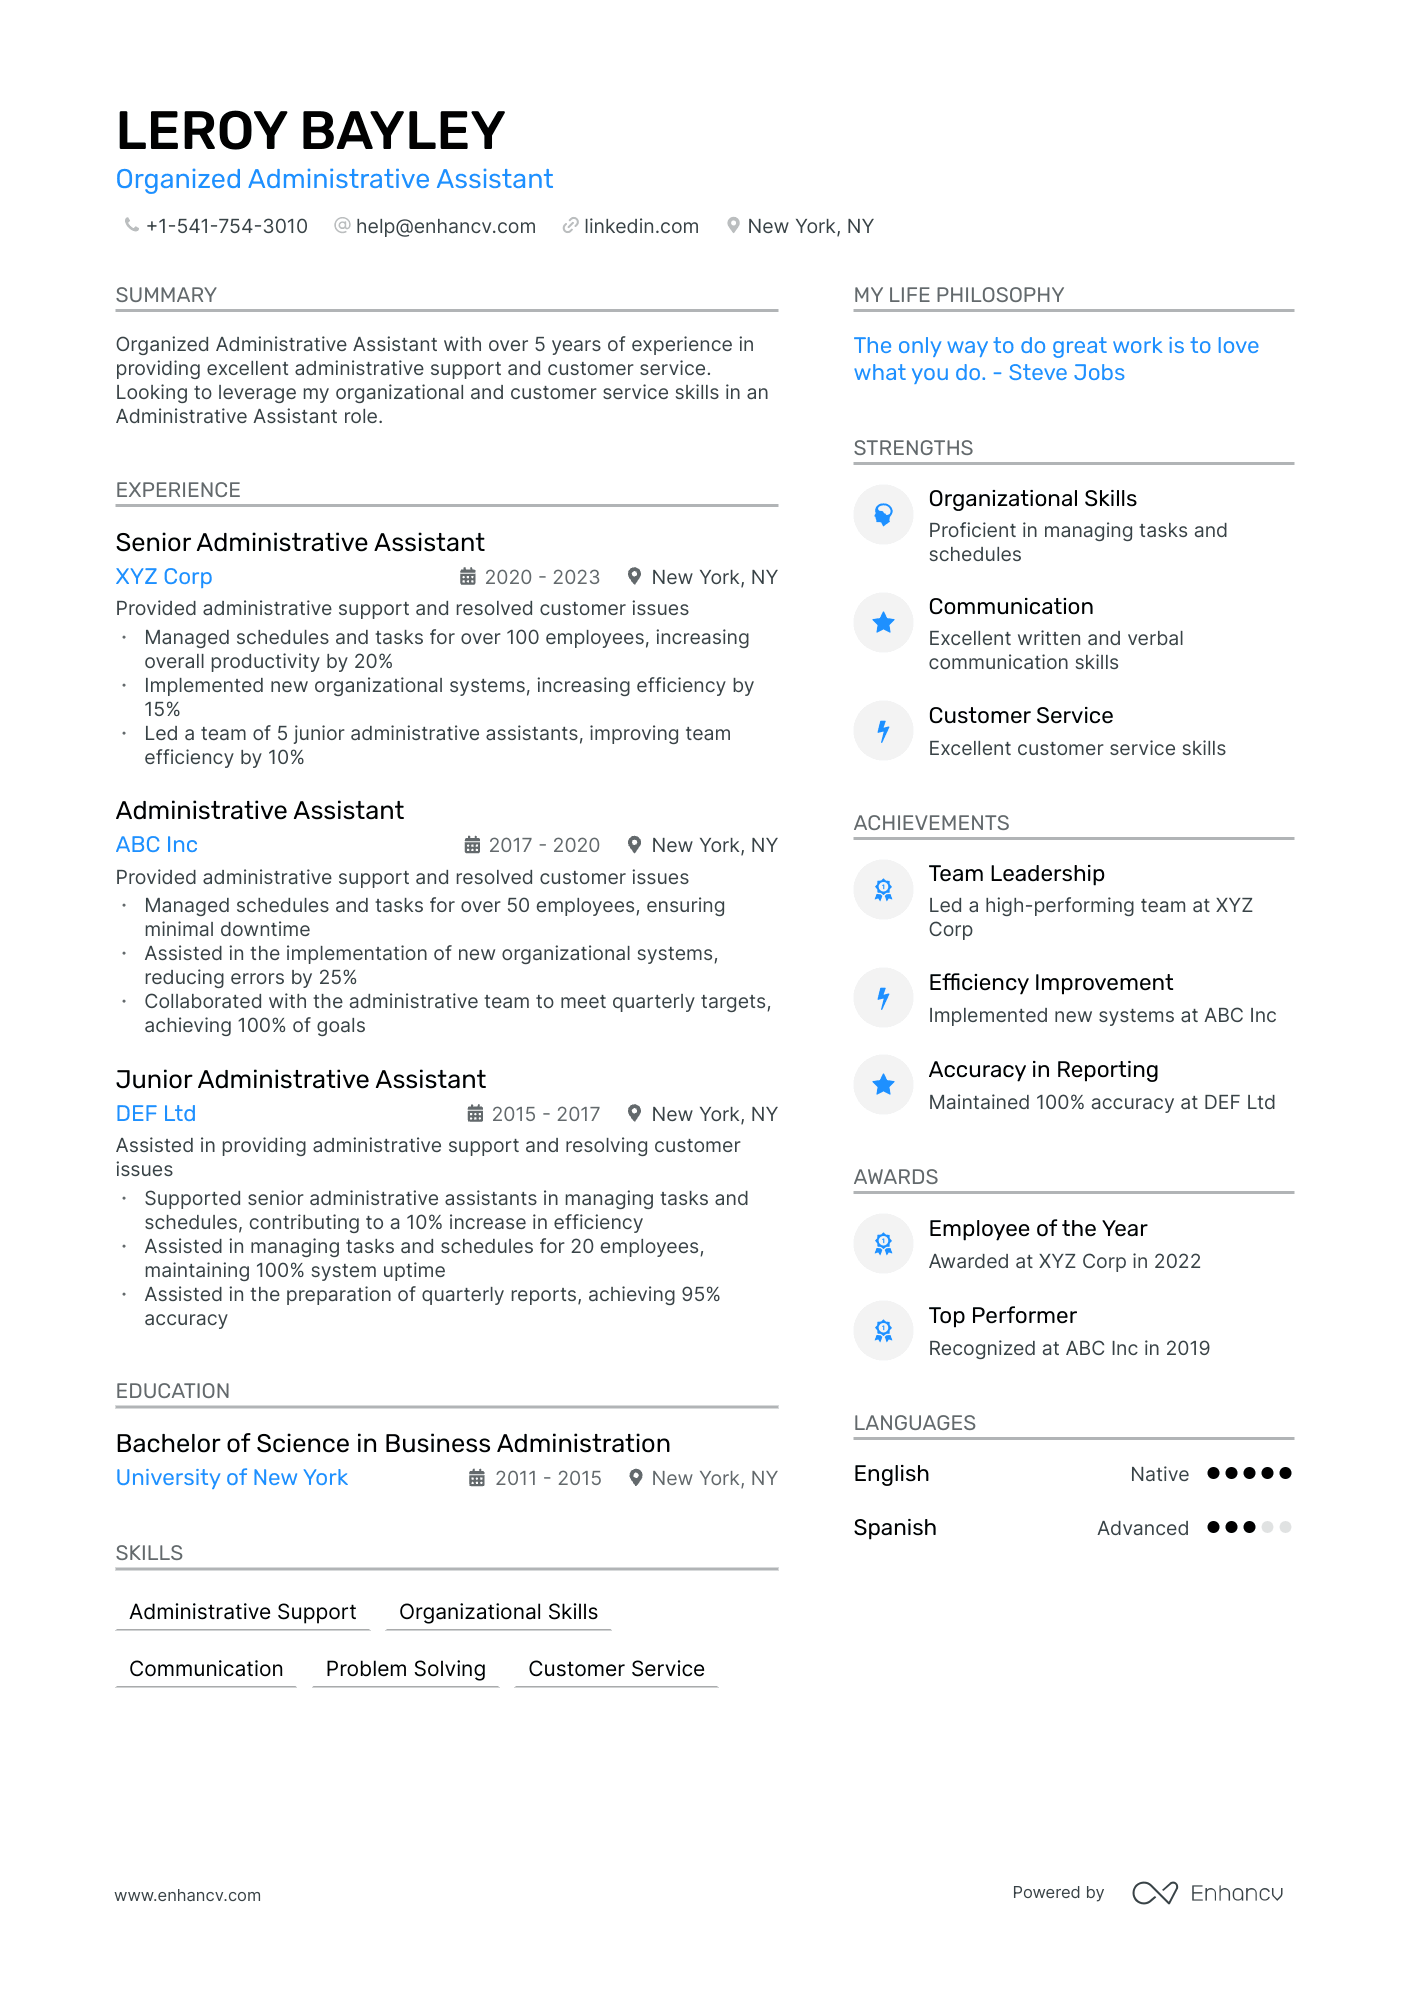 Organized Administrative Assistant resume example